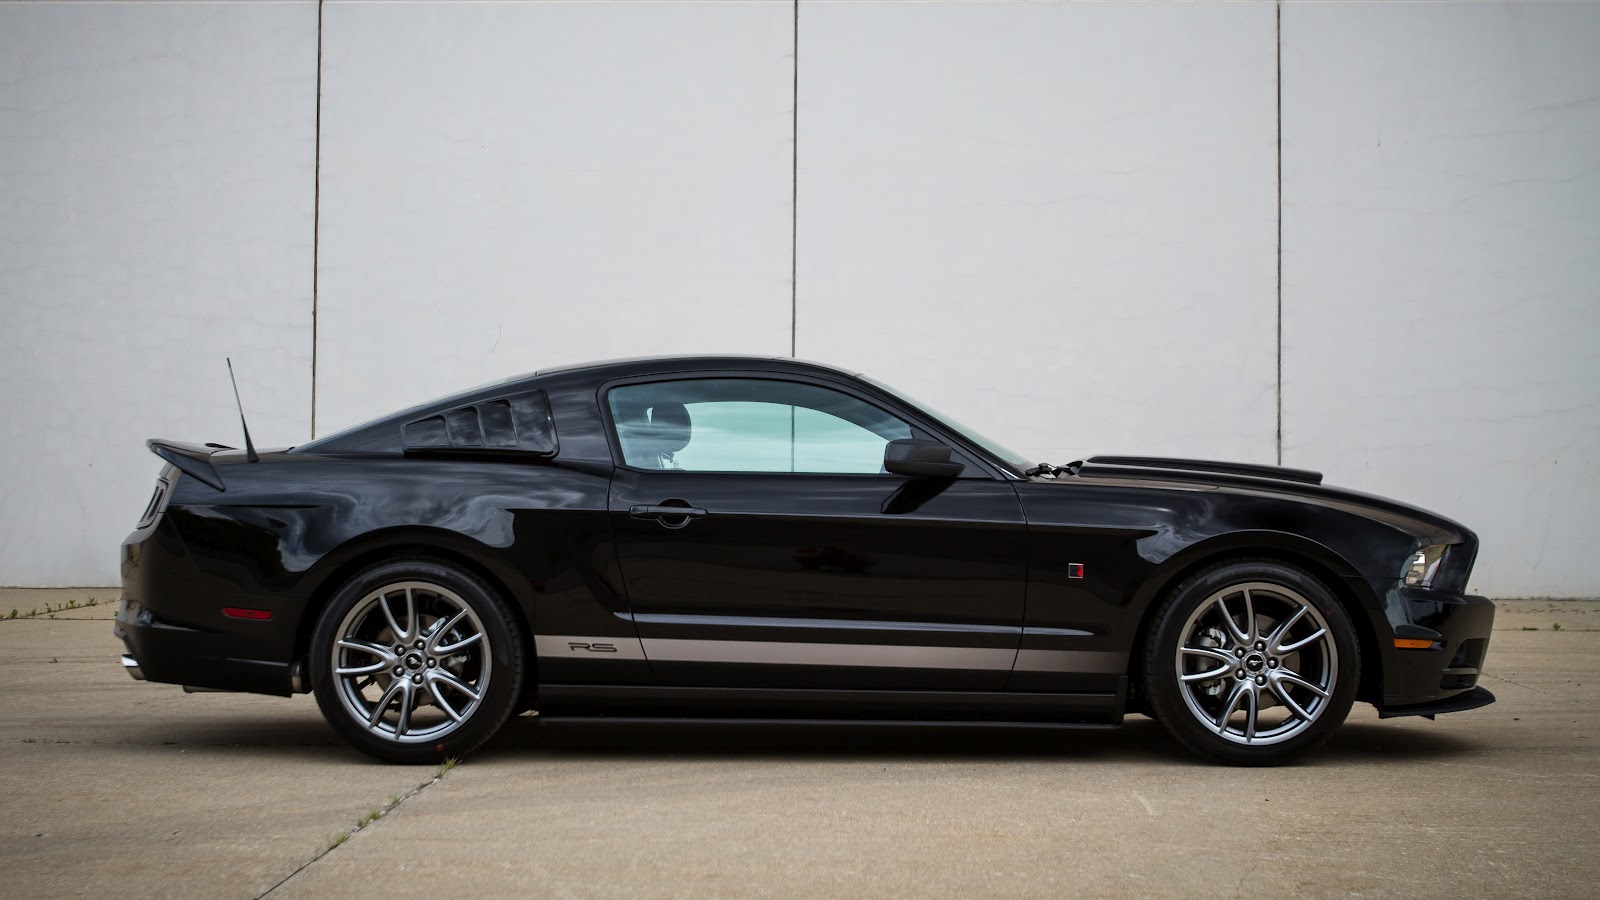 Motor Trend tests the 2013 Ford Mustang V6 Premium